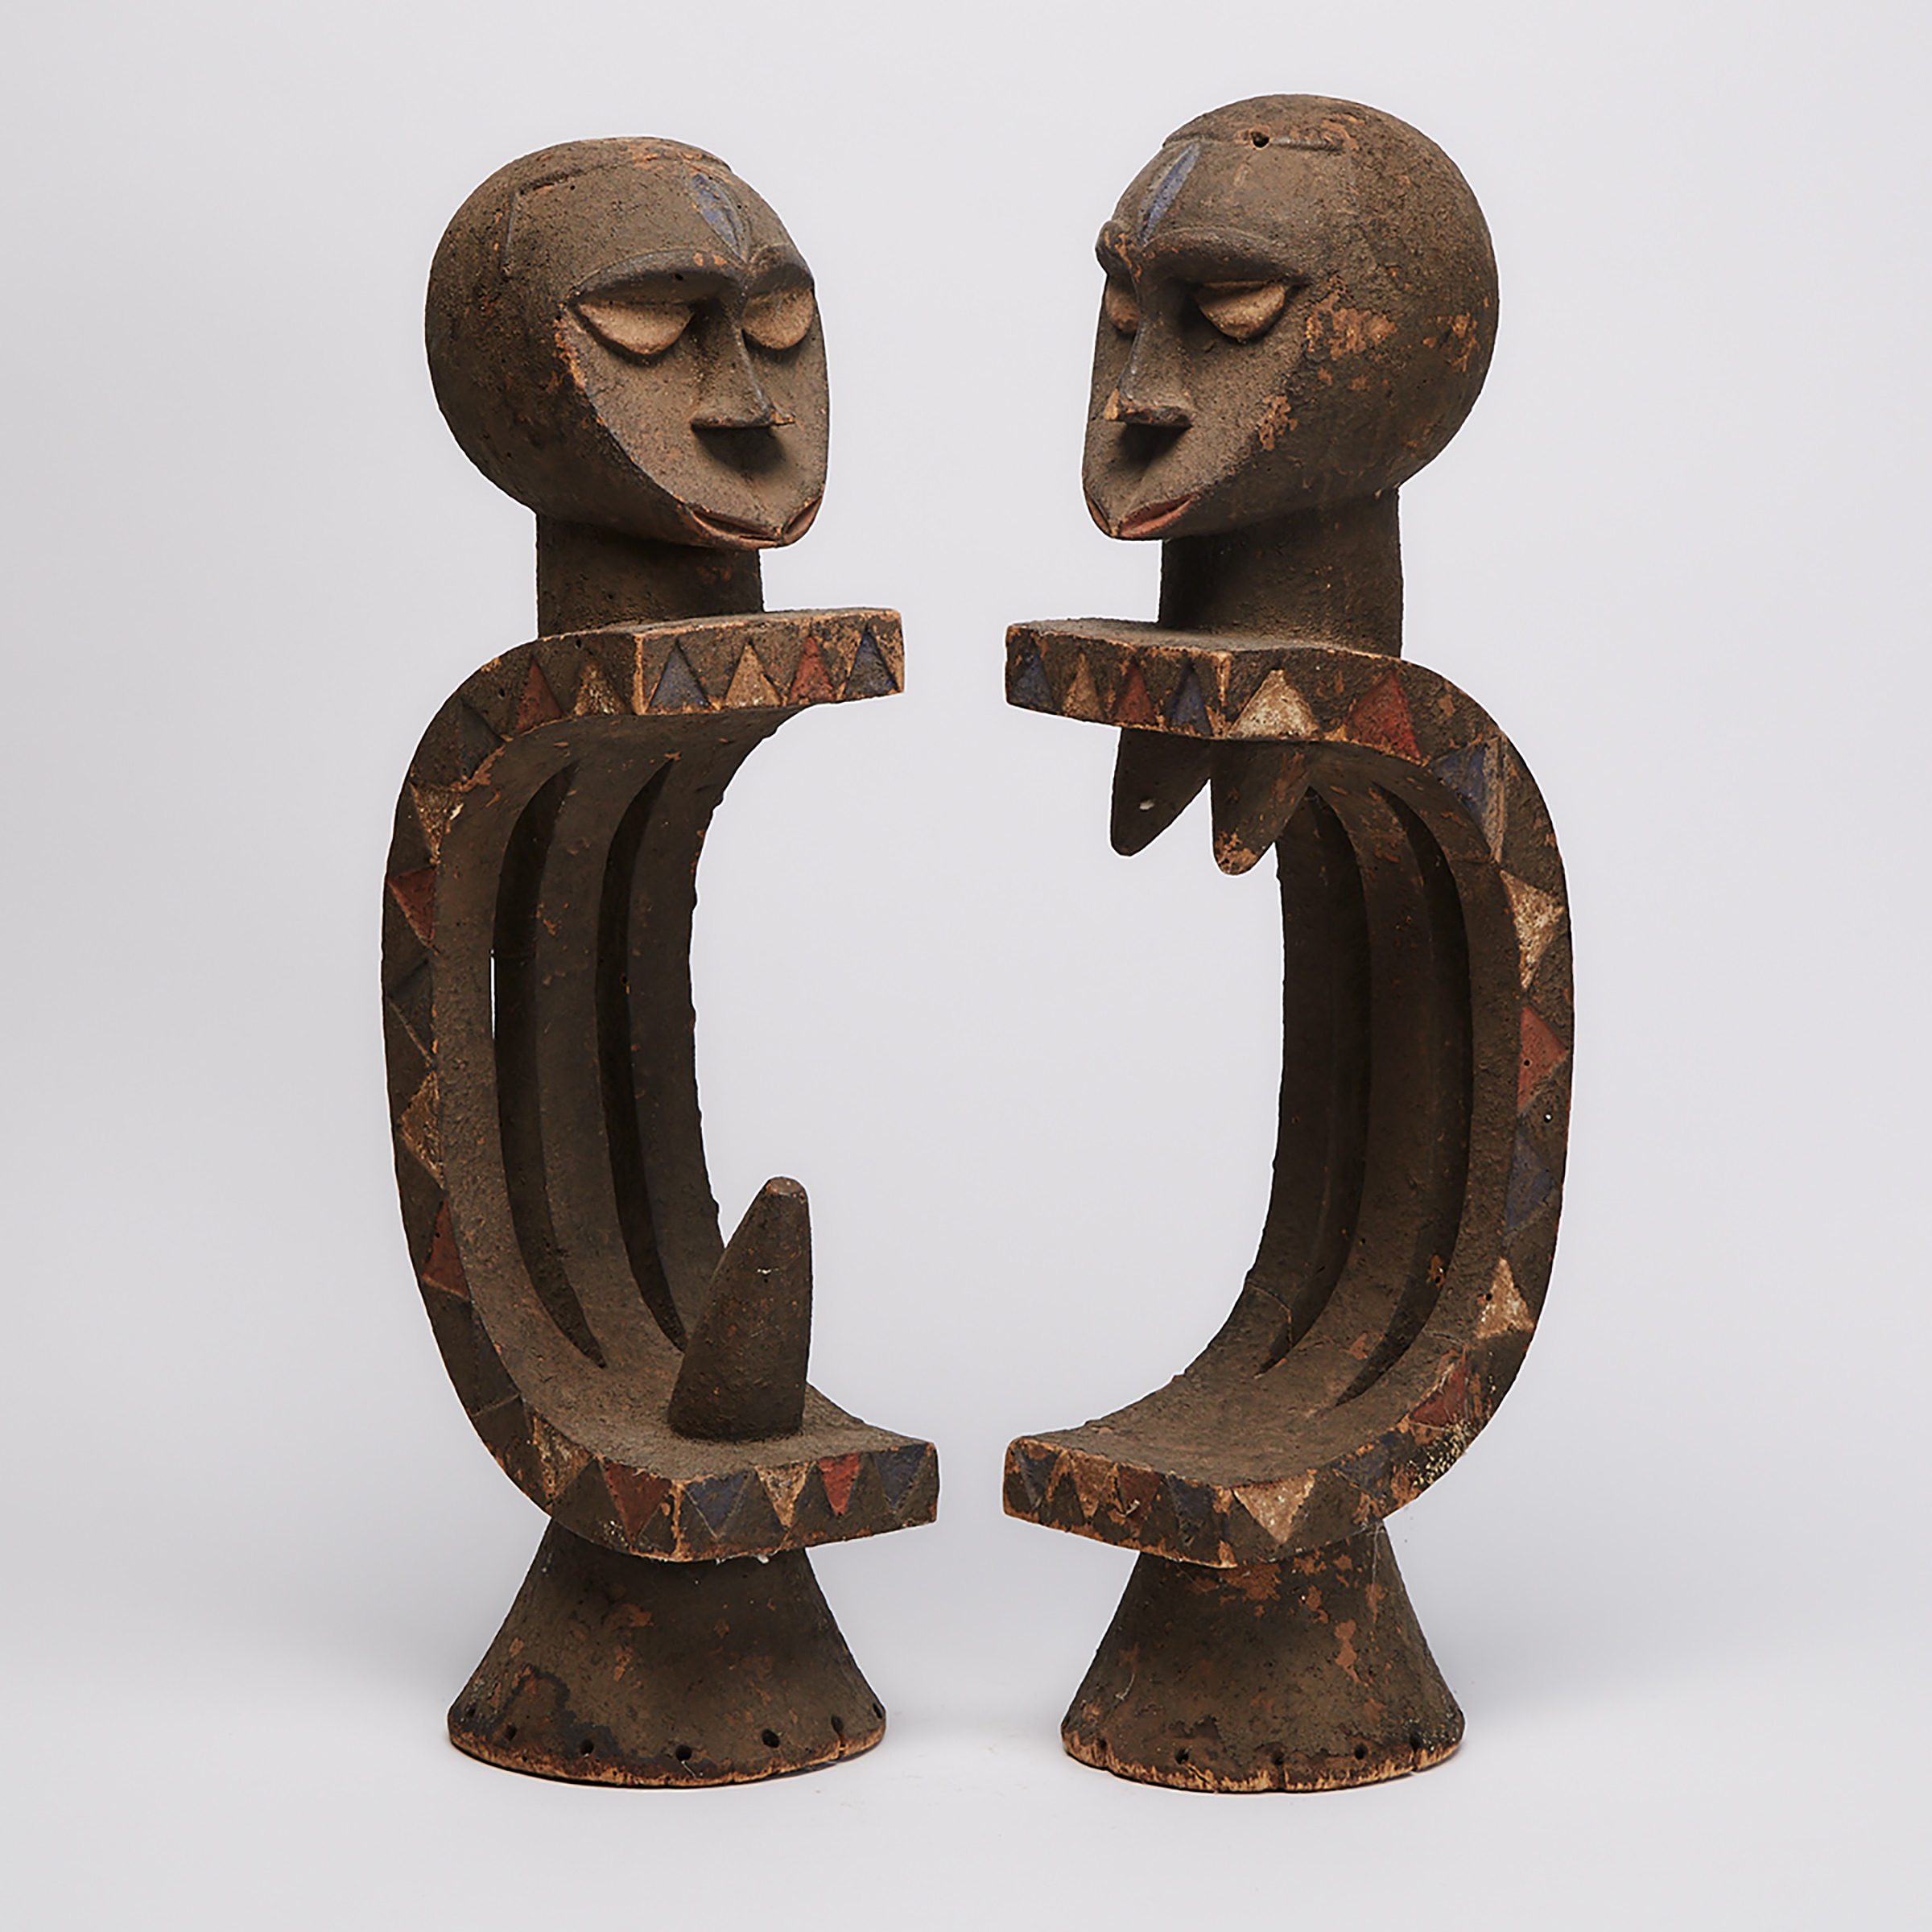 A Pair of Male and Female Headdresses, Gabon, Central Africa